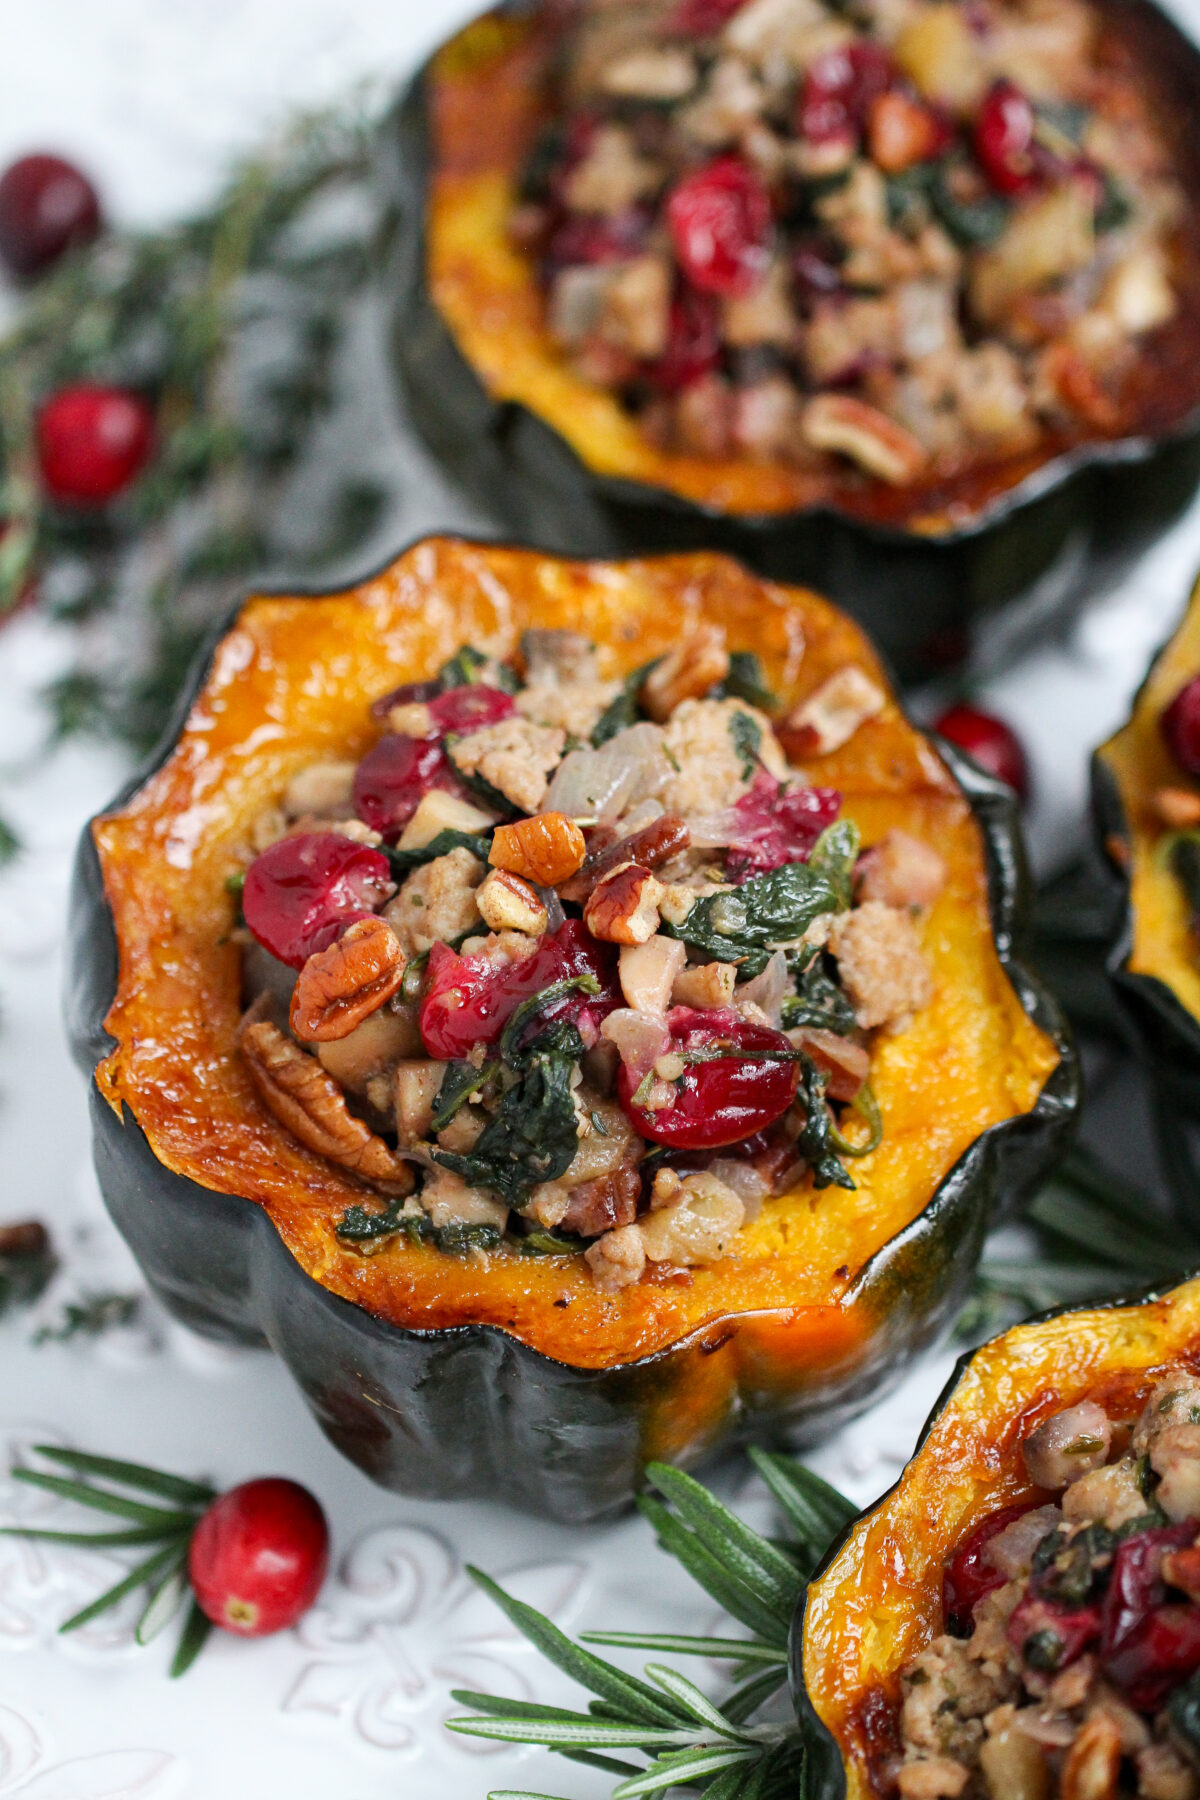 Make the perfect fall or winter dish with this simple, savoury sausage stuffed acorn squash recipe. It's delicious and comforting!